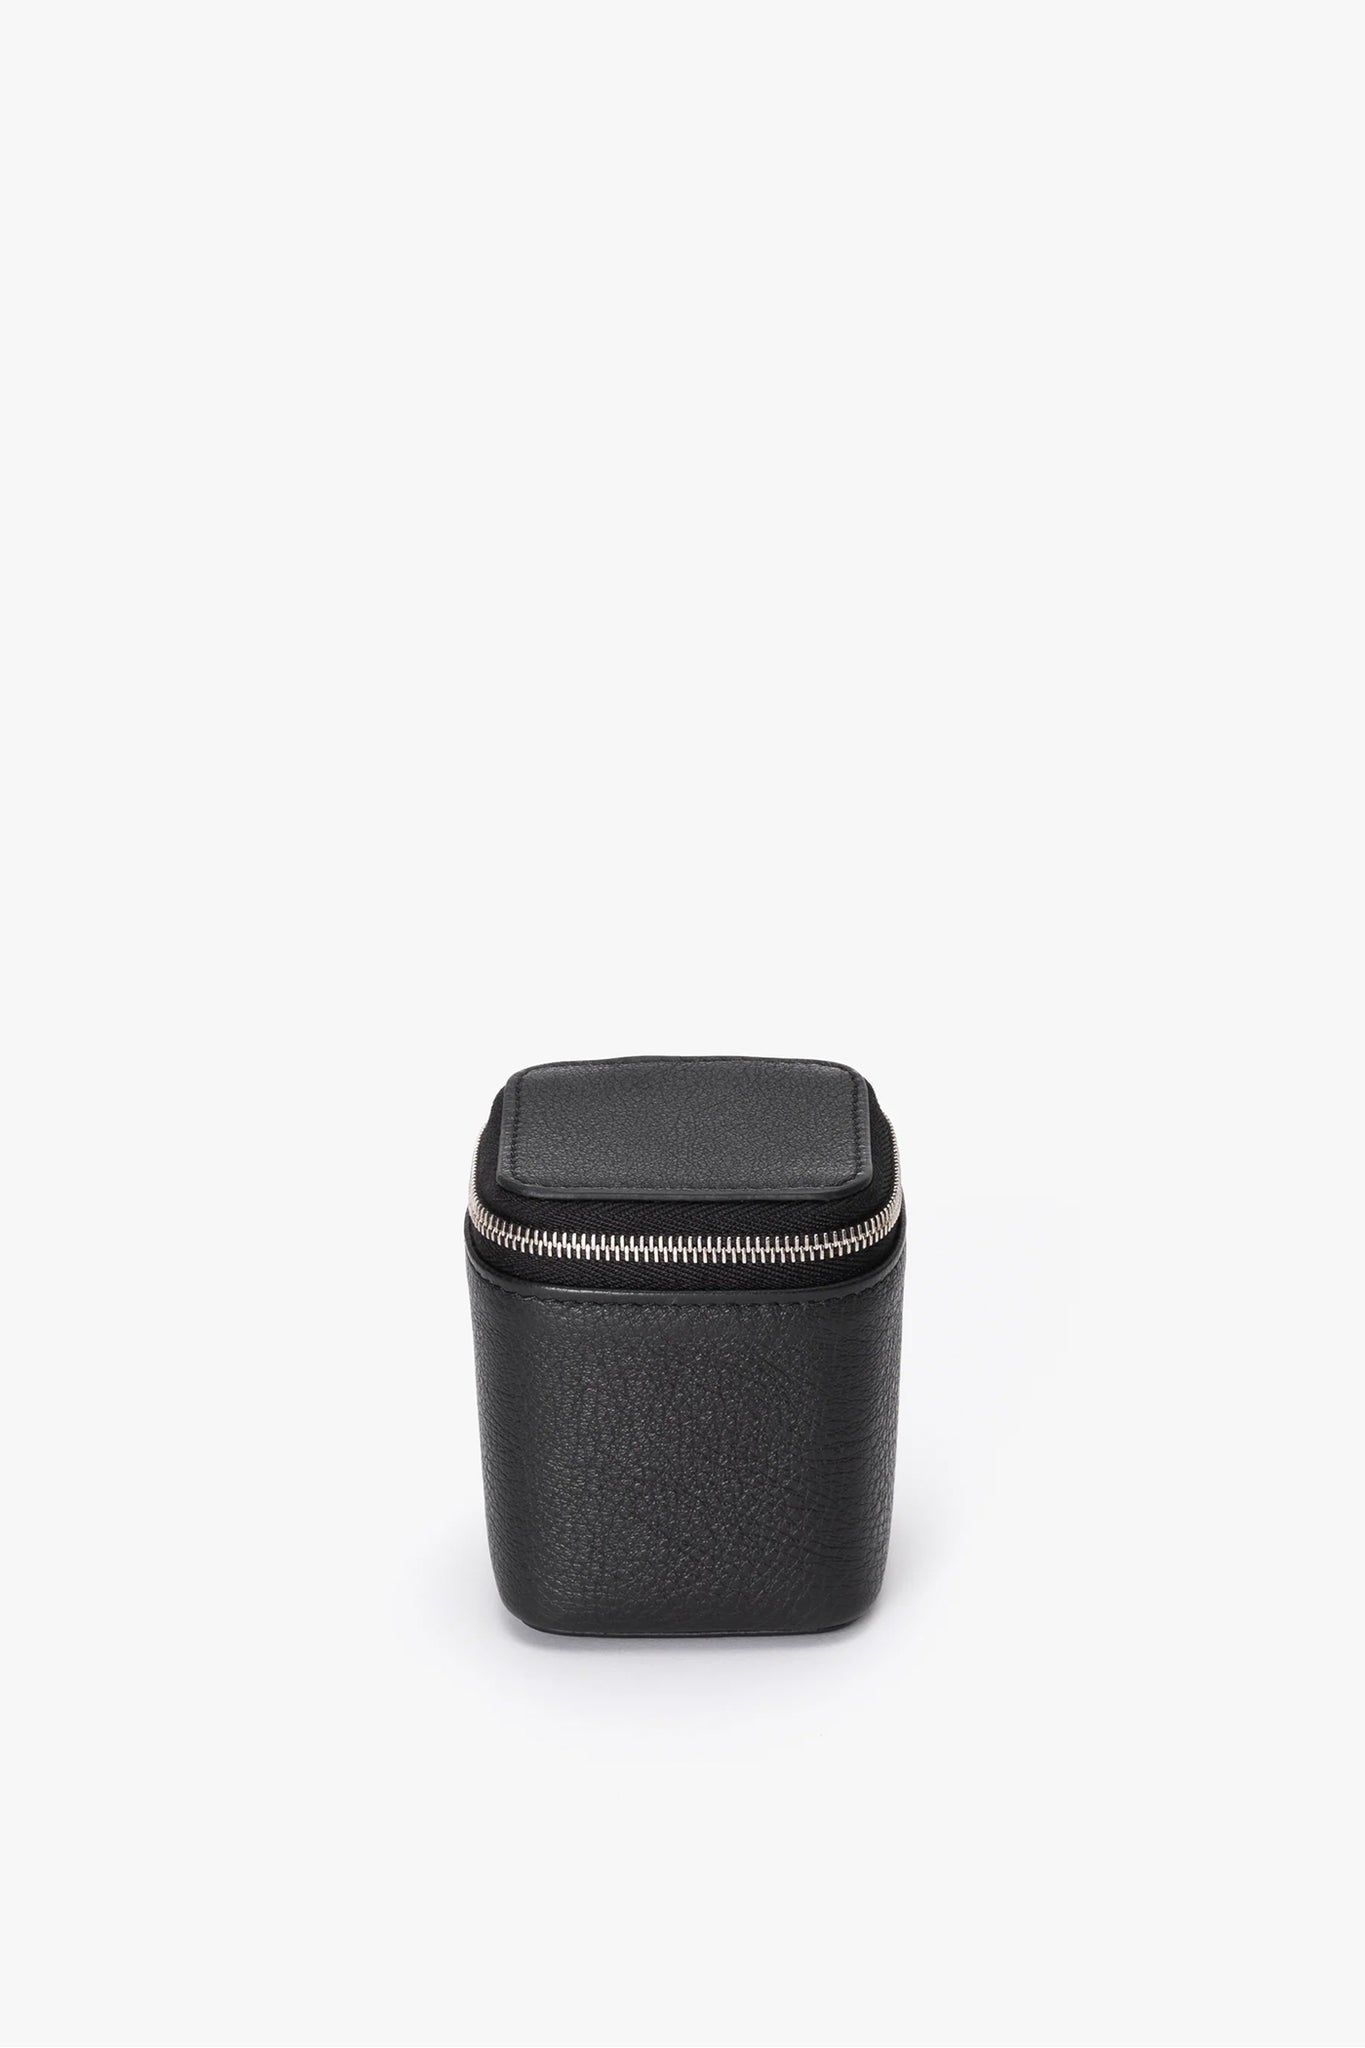 Aeta "PG29 SMALL CONTAINER D/BLACK"